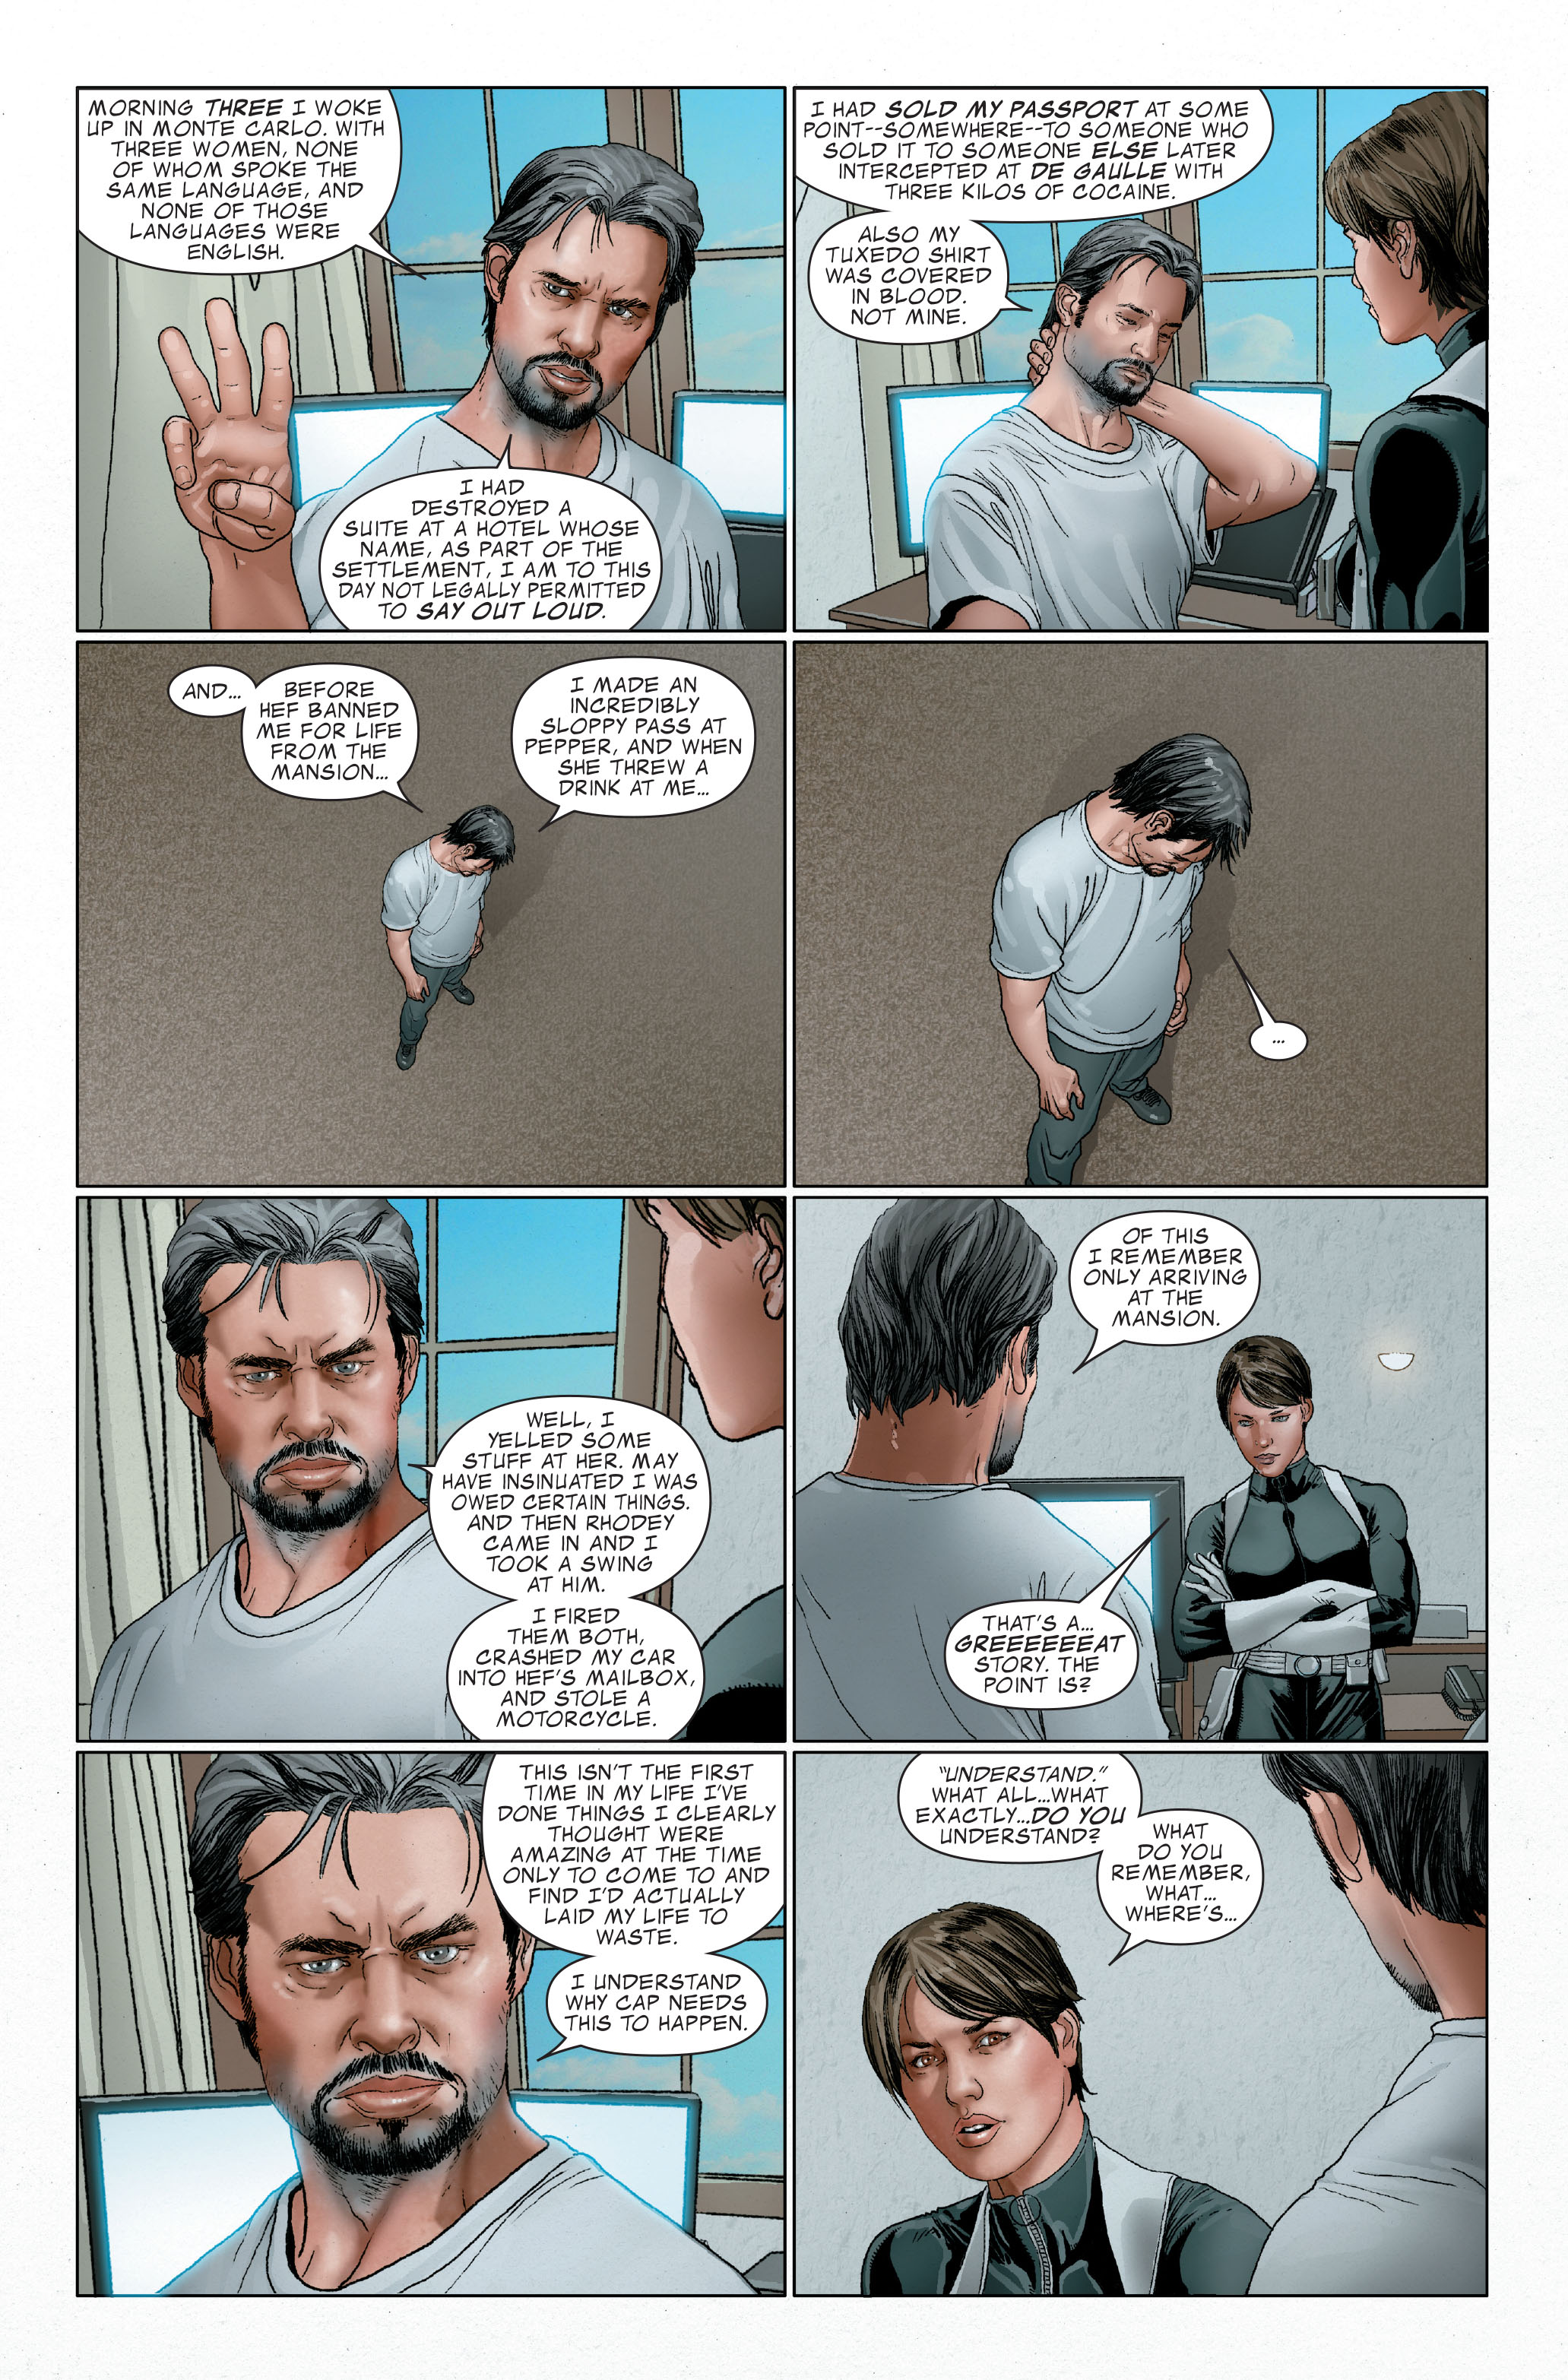 Invincible Iron Man (2008) 26 Page 11